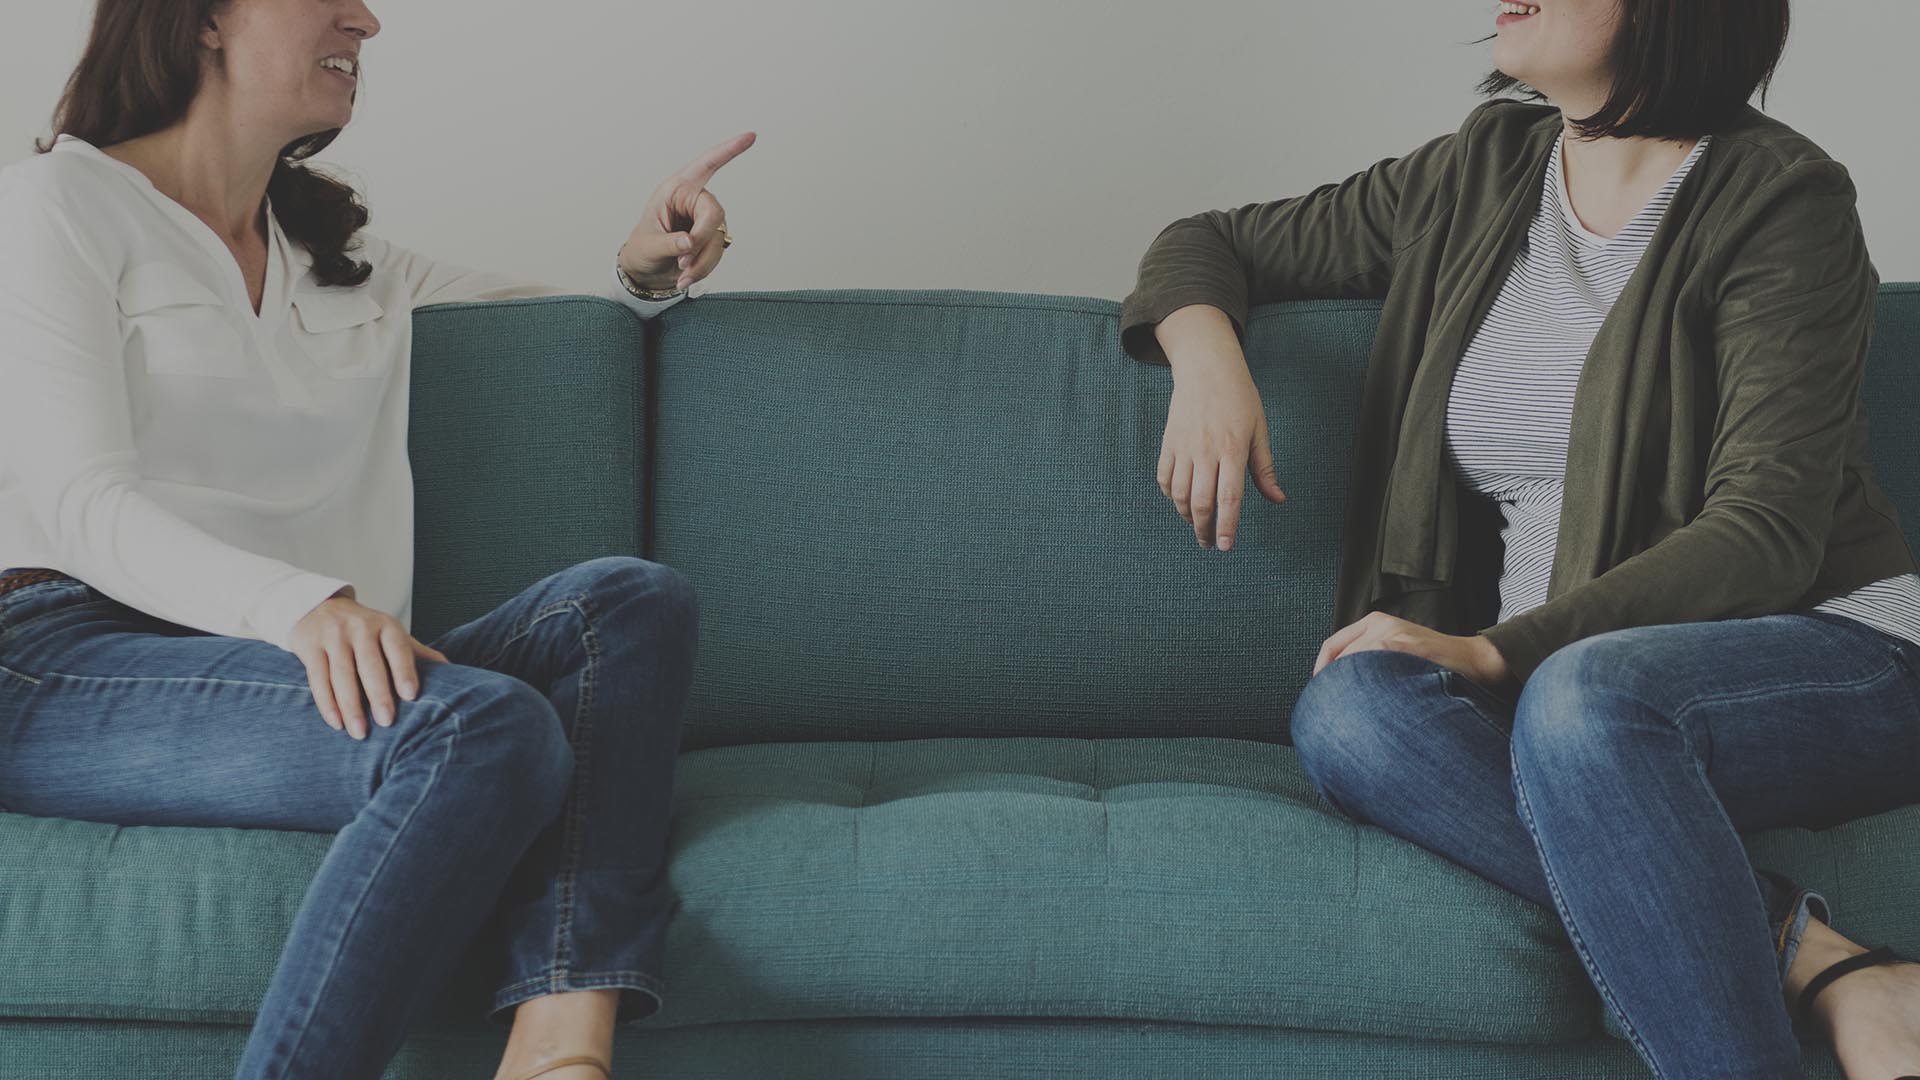 Women talking together on the couch